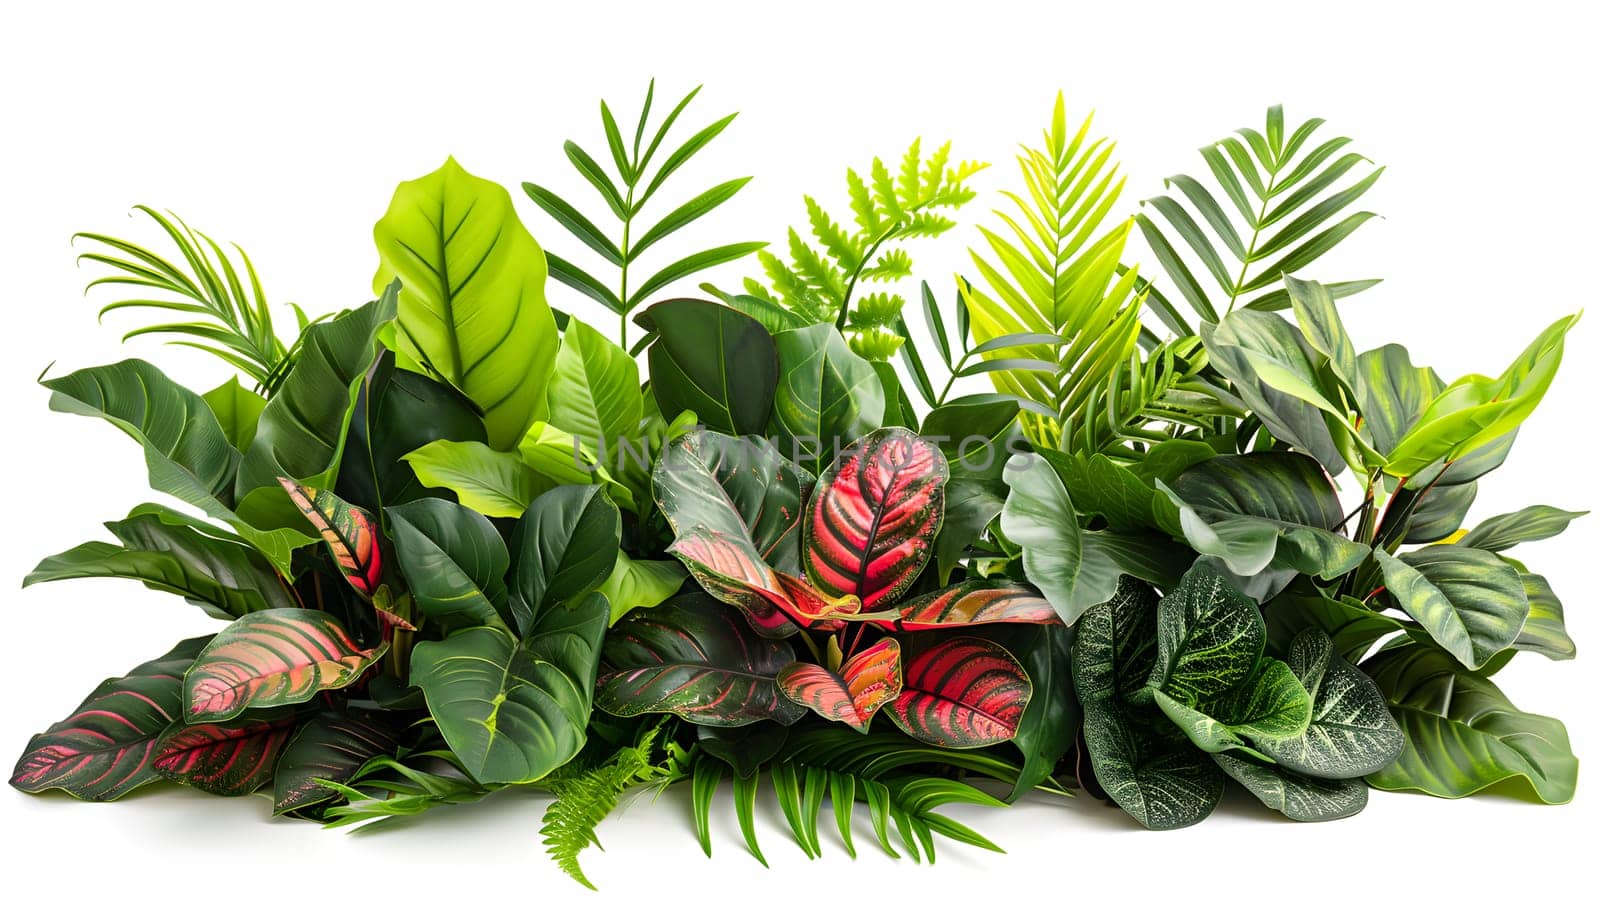 An artistic depiction of a variety of terrestrial plants with red leaves set against a white background, showcasing the beauty of nature in a landscape